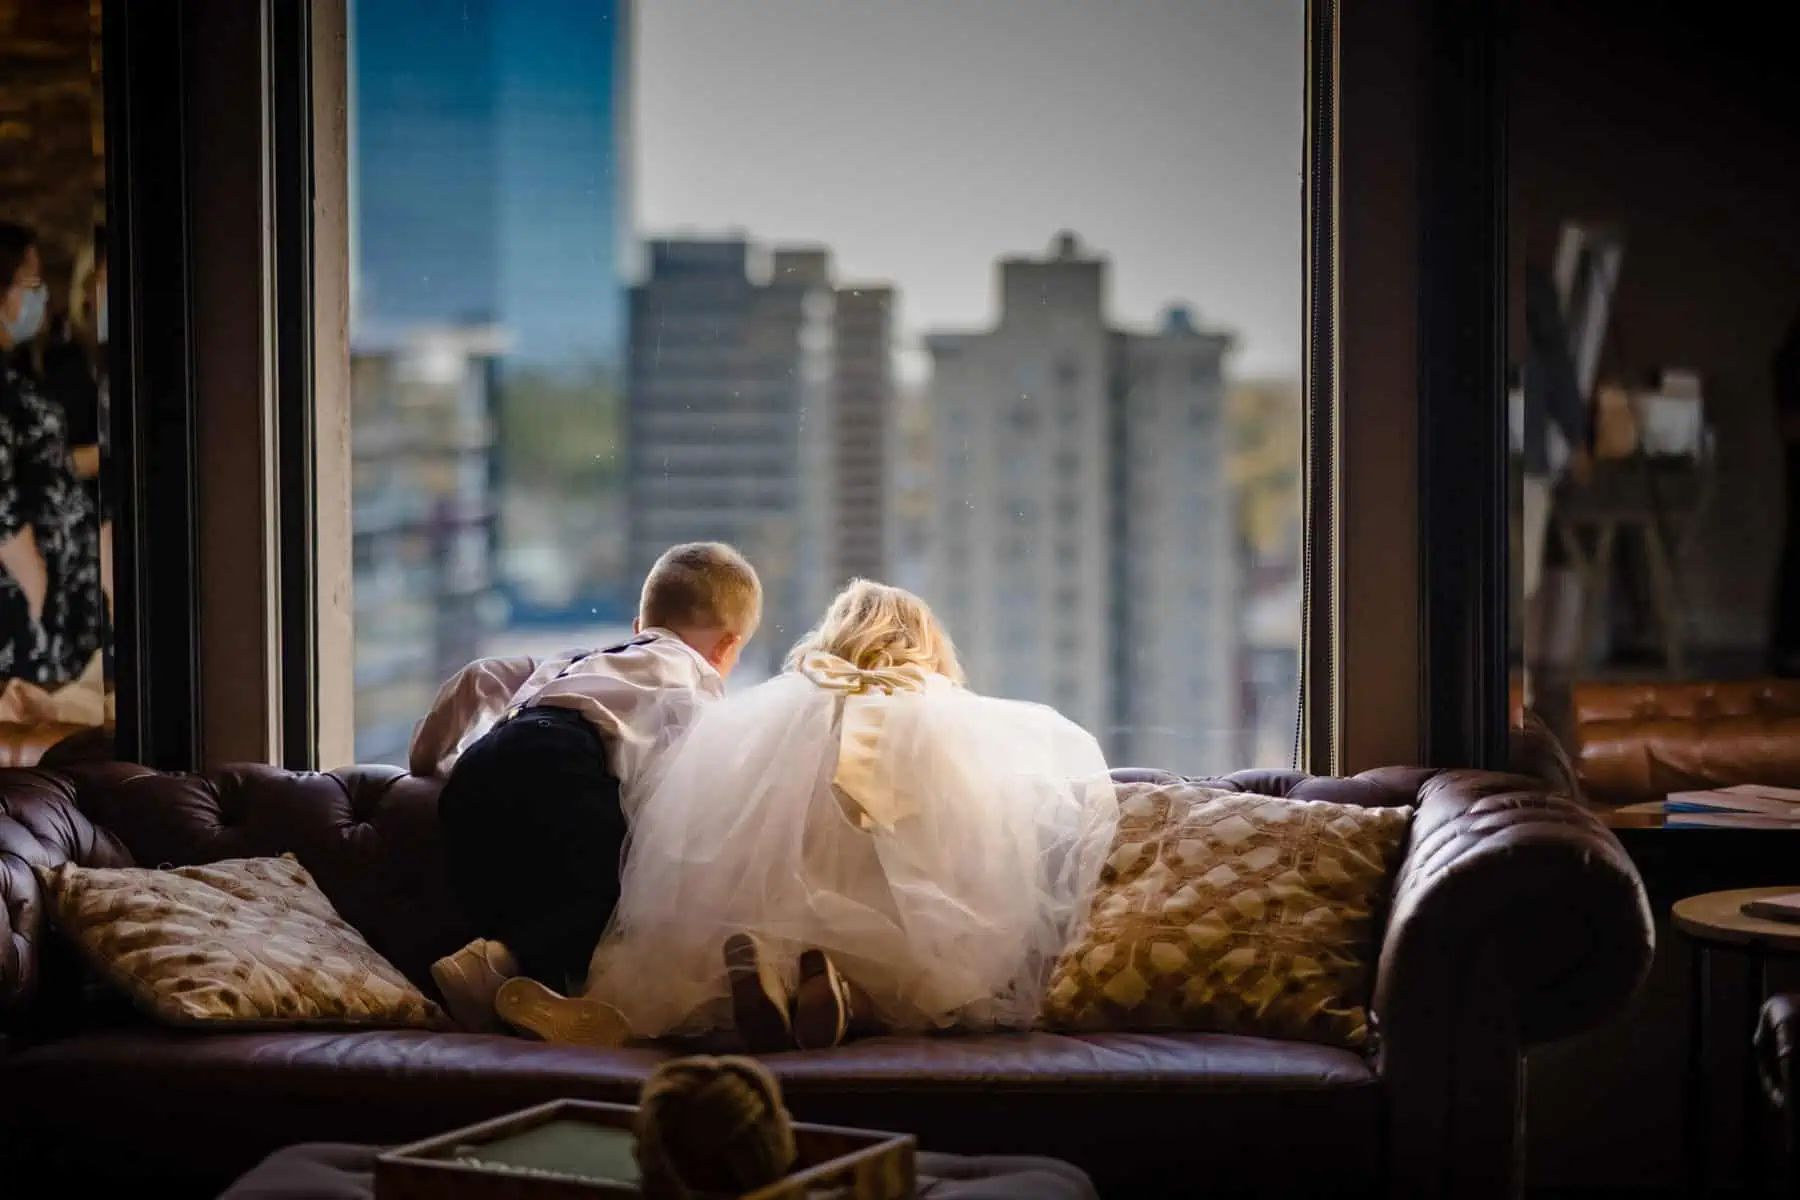 A bride and groom sitting on a couch in front of a window.